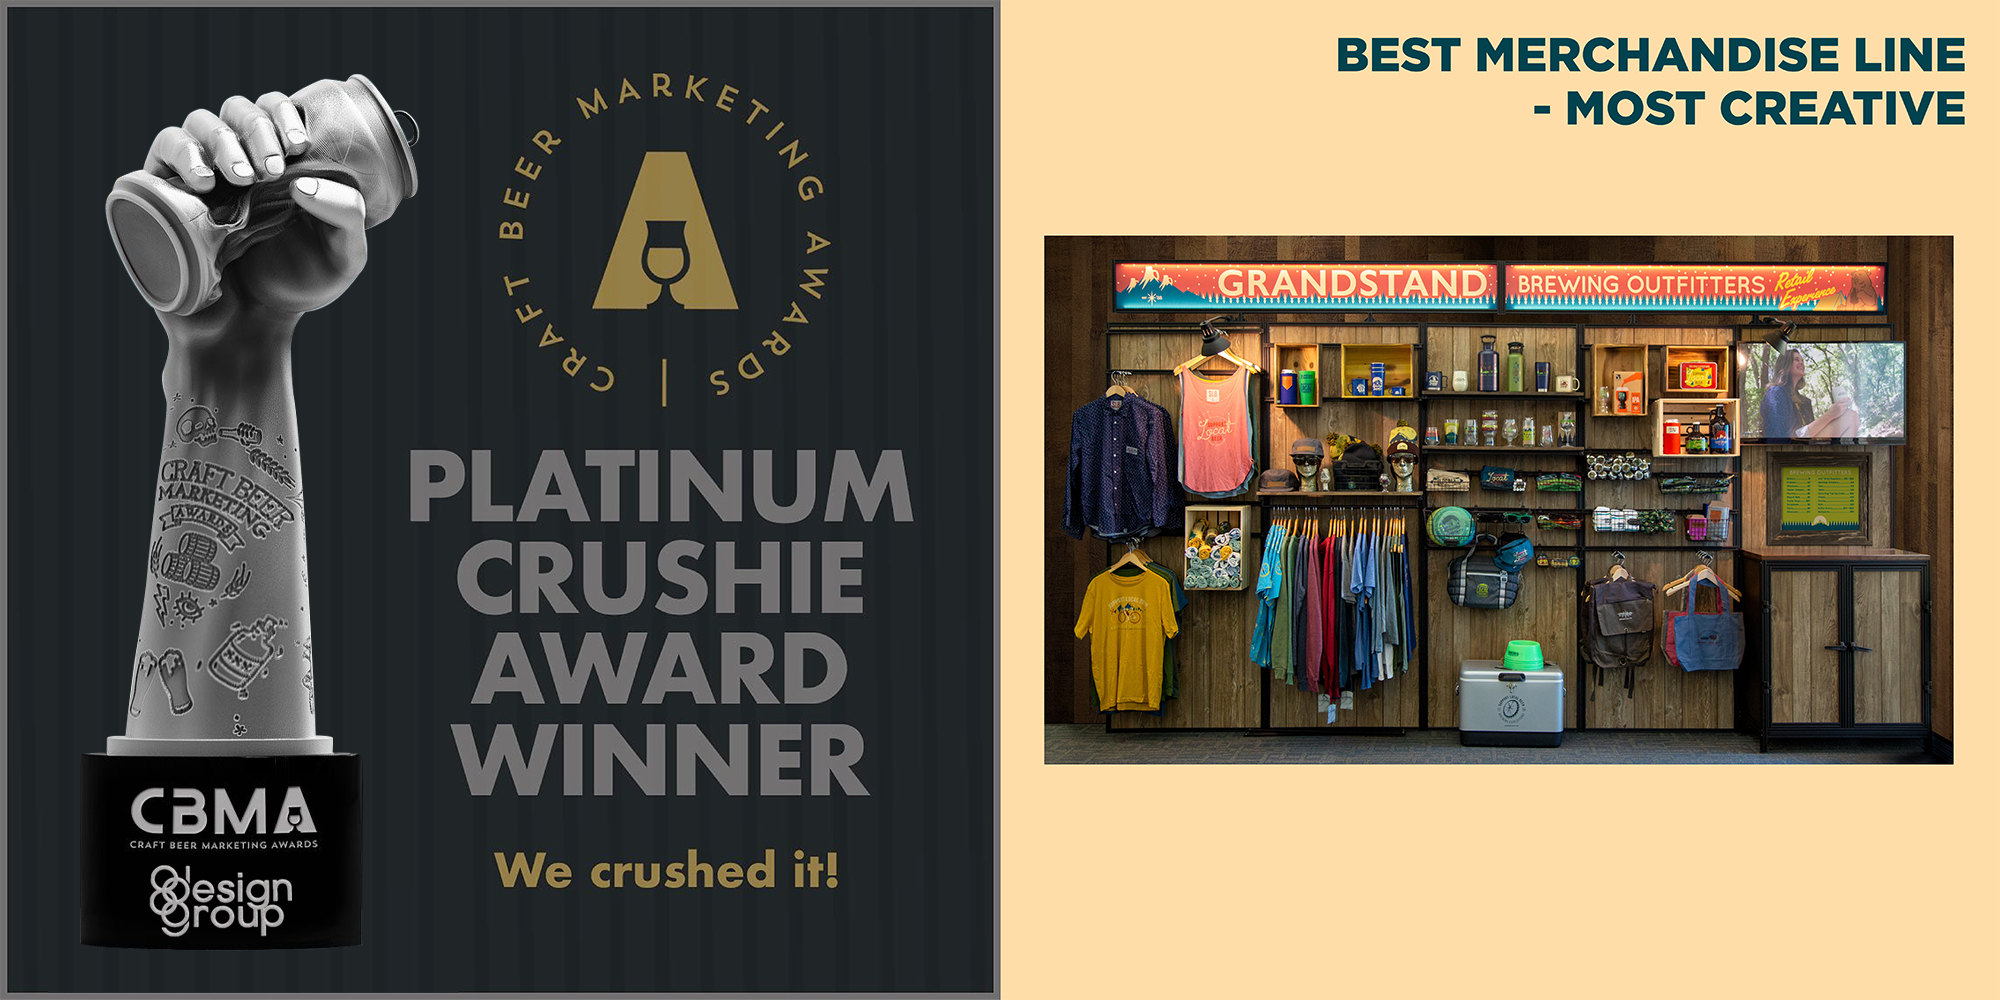 Best Merchandise Line / Most Creative Line for Brewing Outfitters Awarded to 88 Design Group